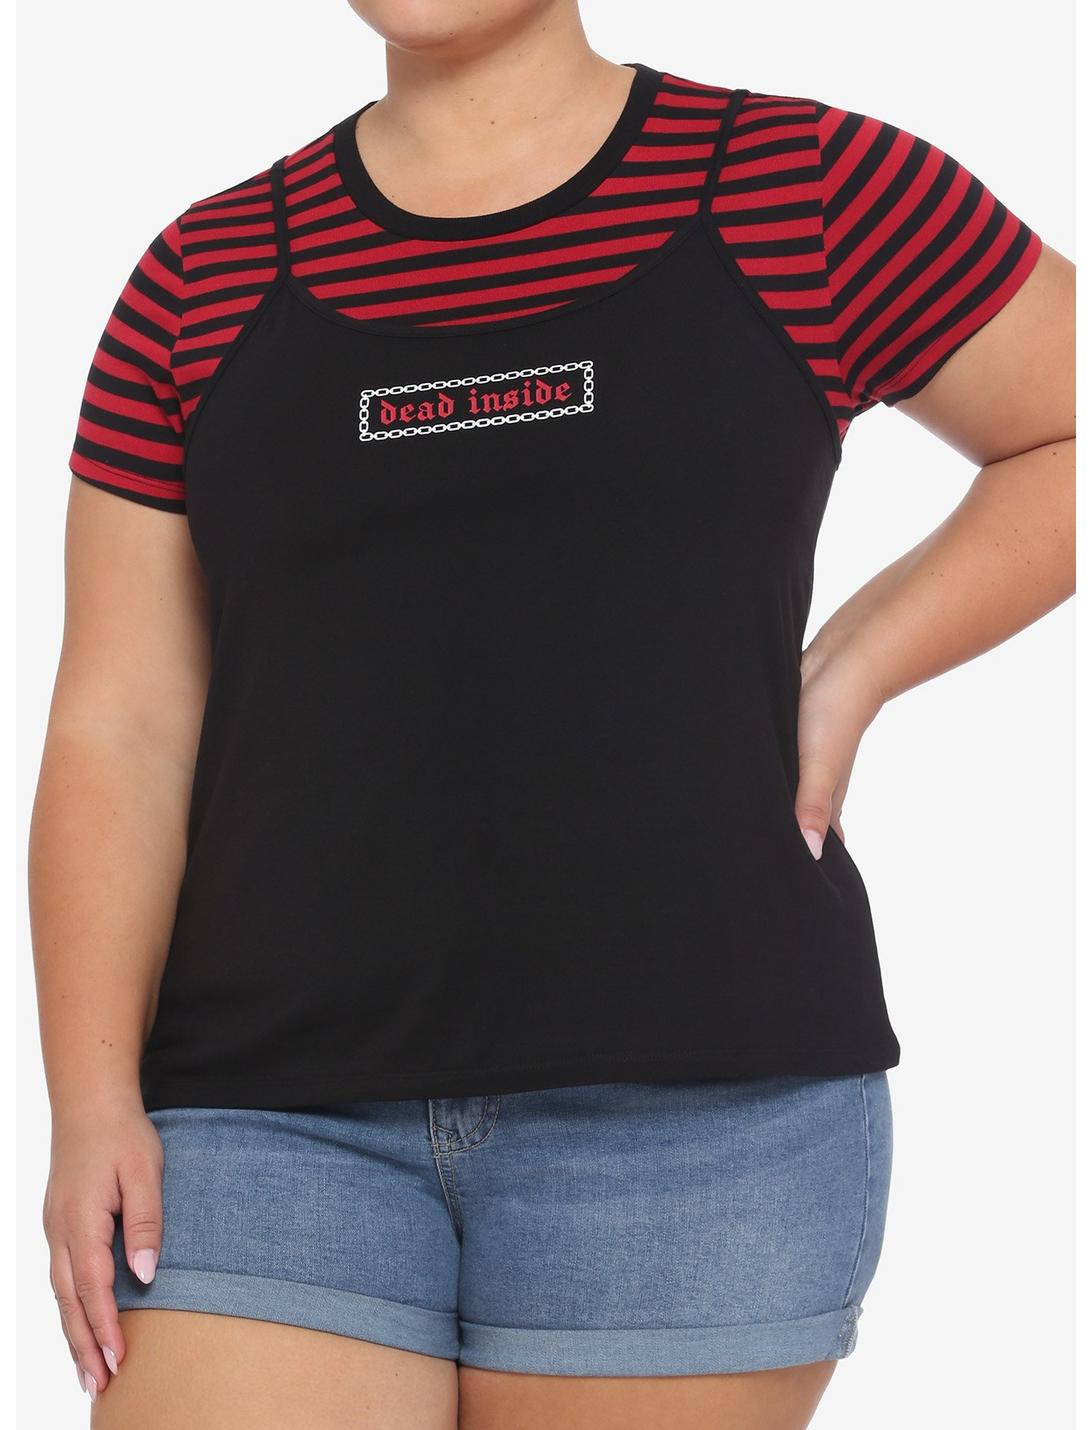 Dead Inside Black & Red Stripe Girls Strappy Tank Top With T-Shirt Plus Size, STRIPES - RED, hi-res